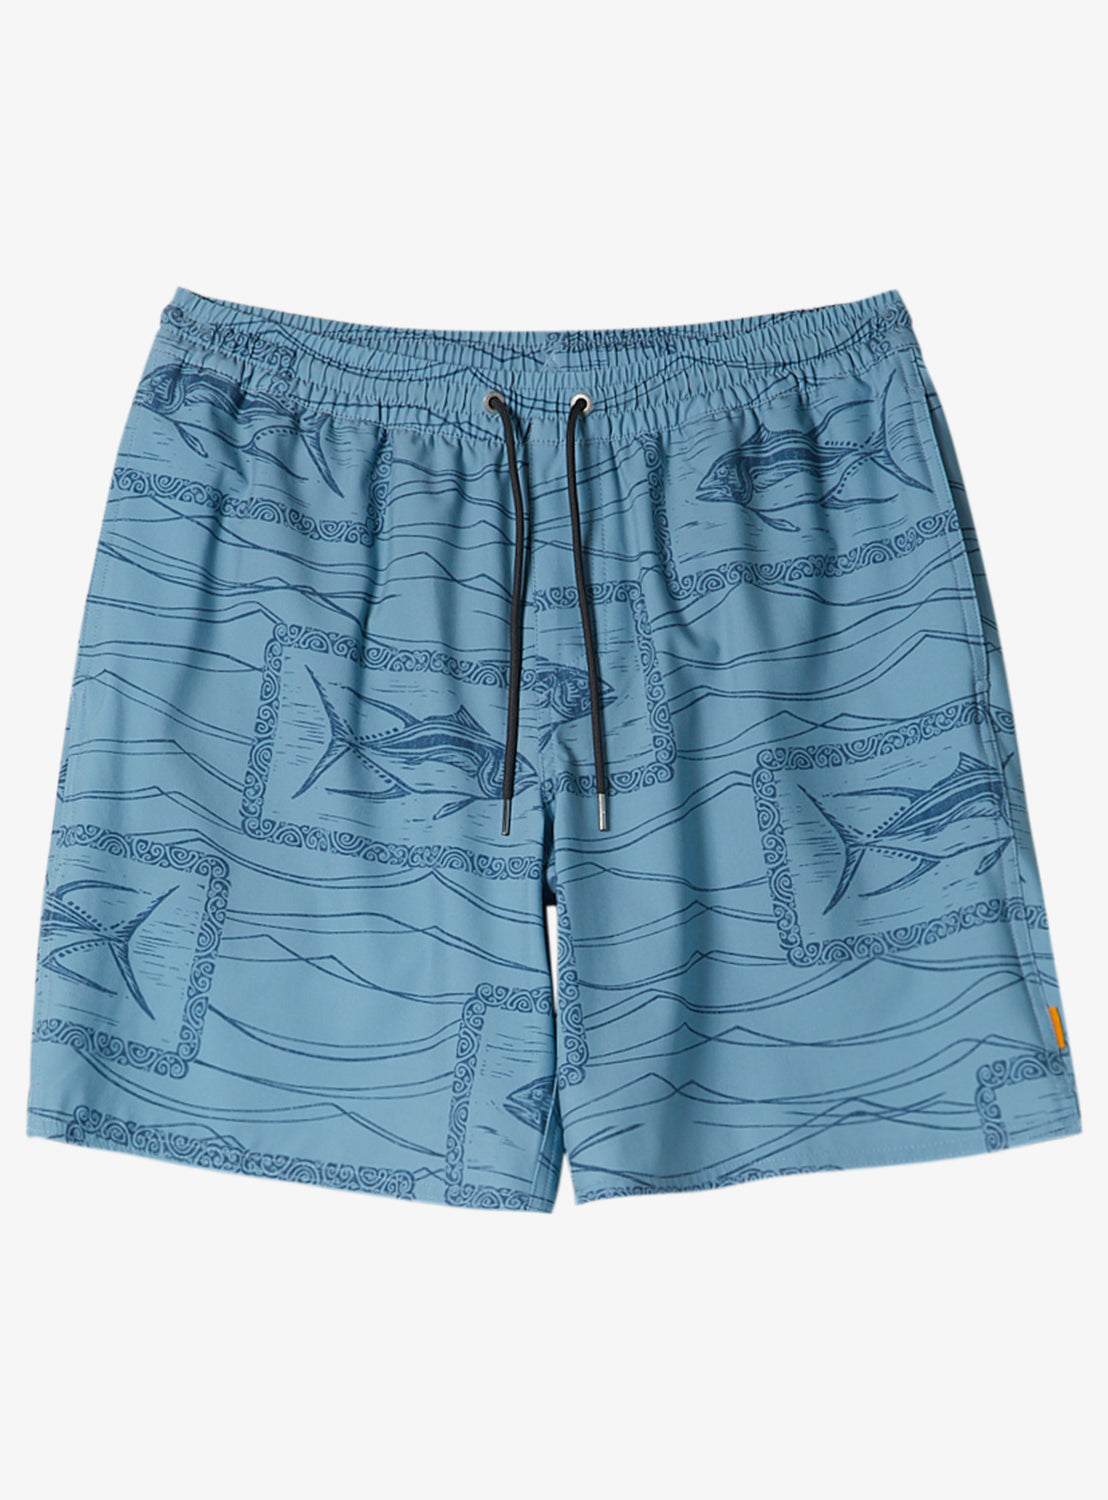 Quiksilver: Waterman Reef Point 17" Volley Shorts